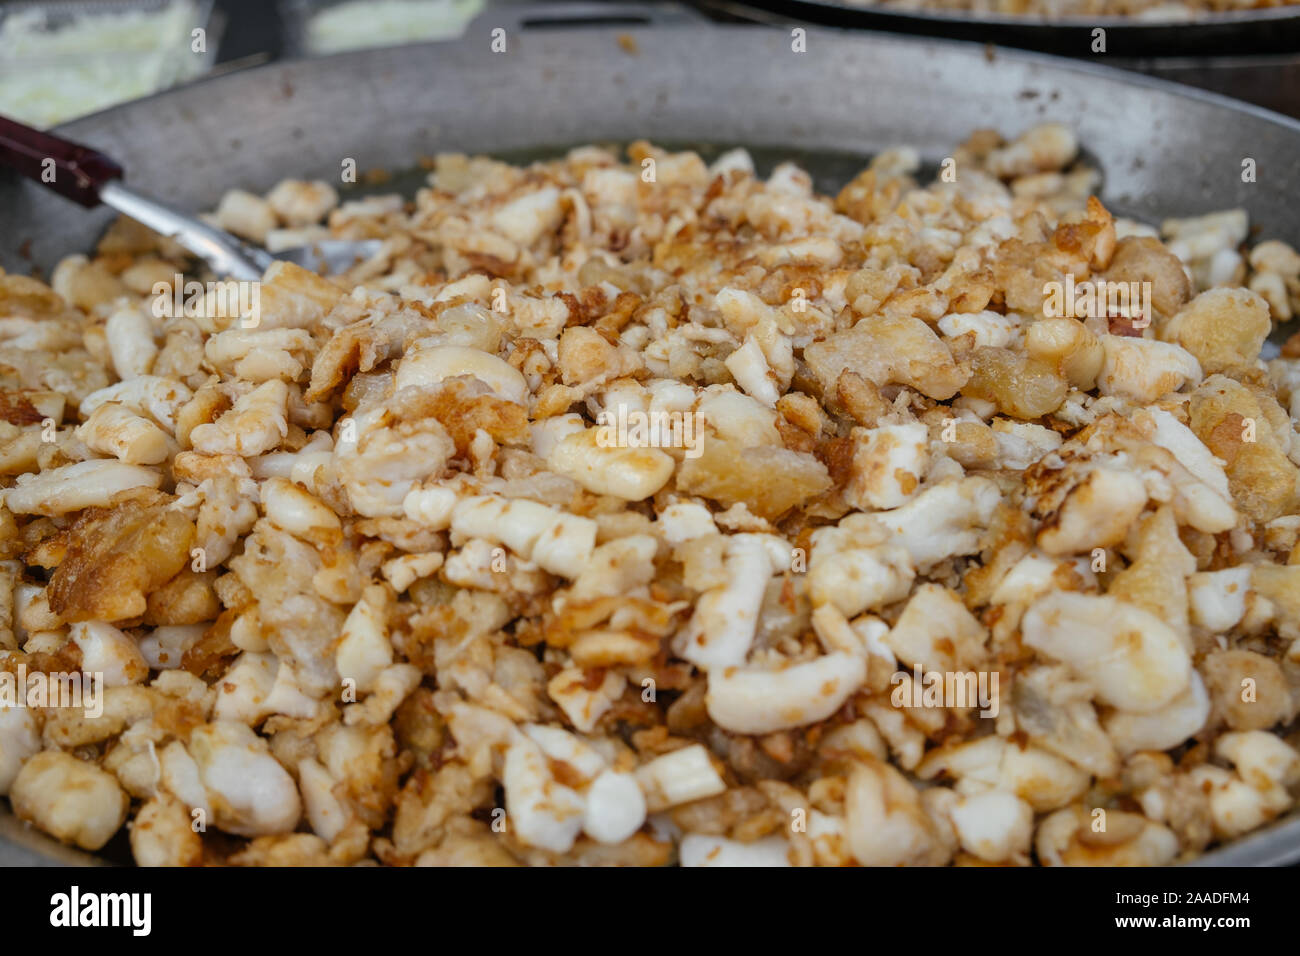 Freshly cooked stir fried squid eggs on flat pan for sale in a local street food fresh market in Bangkok, Thailand. Stock Photo